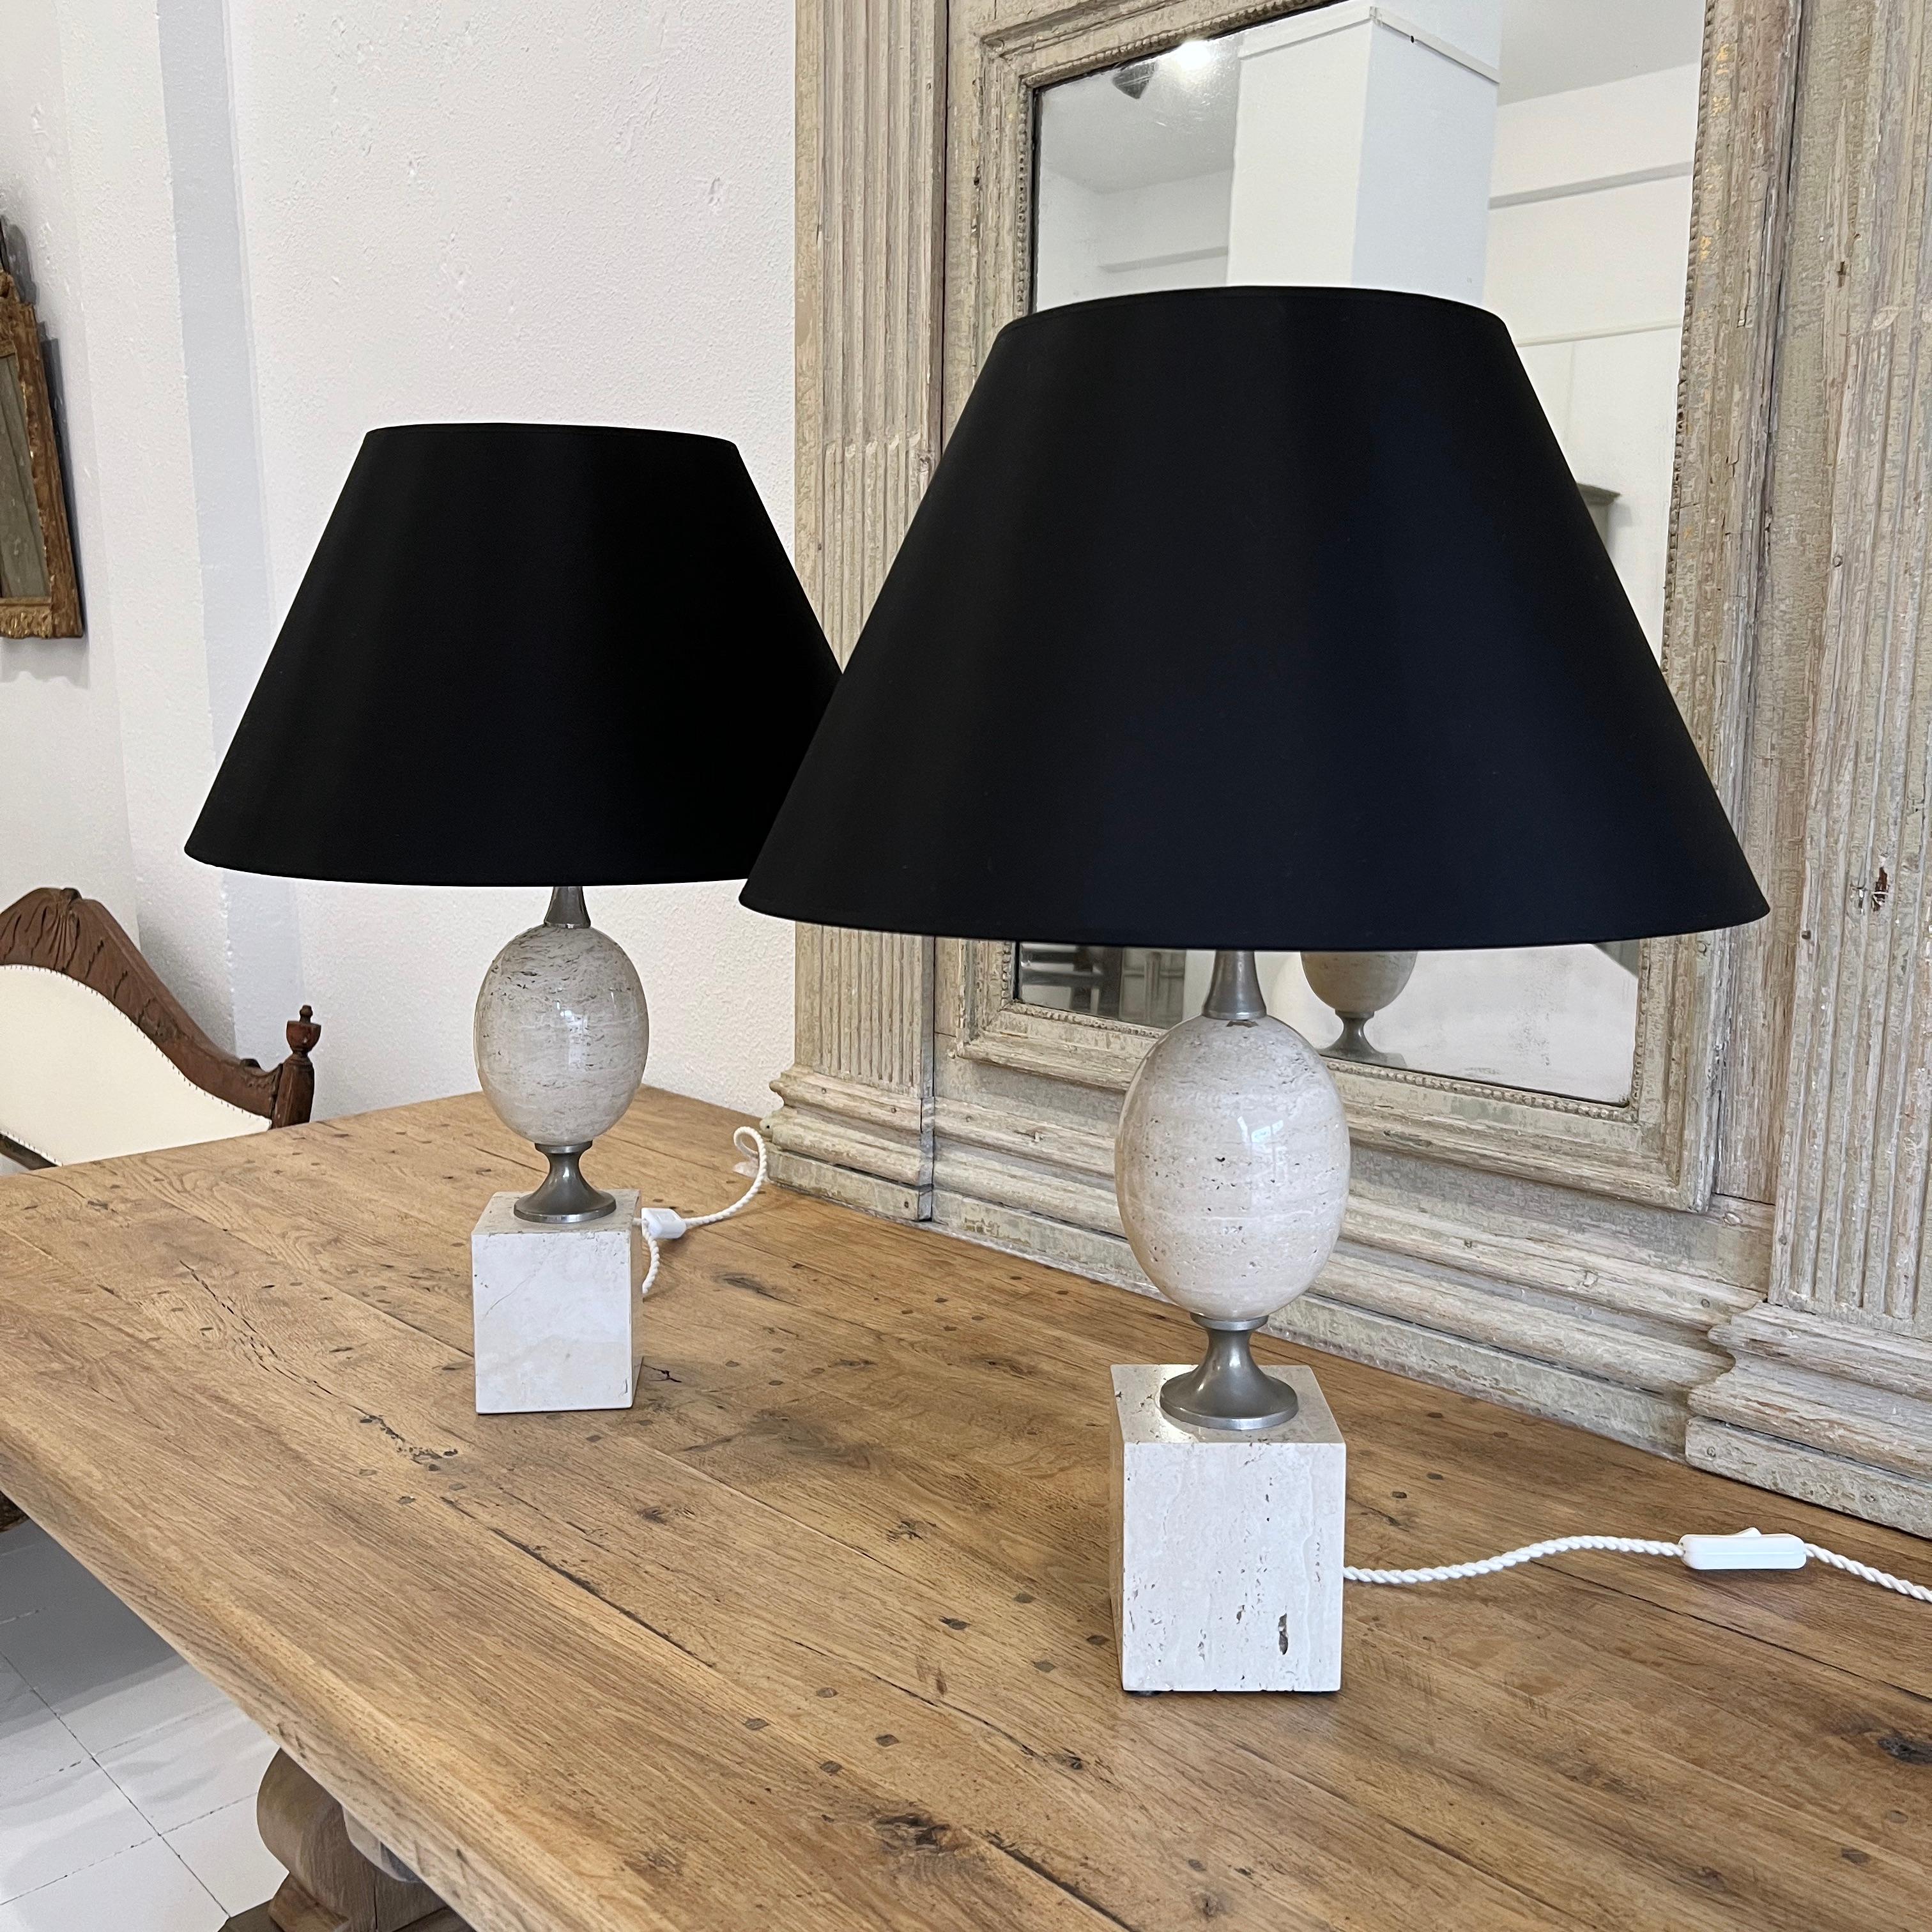 1960s French Maison Barbier pair of lamps designed by Philippe Barbier, made of travertine marble and nickel hardware. The high of the lamps is 40cm without shades. They have been rewired. 

The shades are not included in the selling price.

